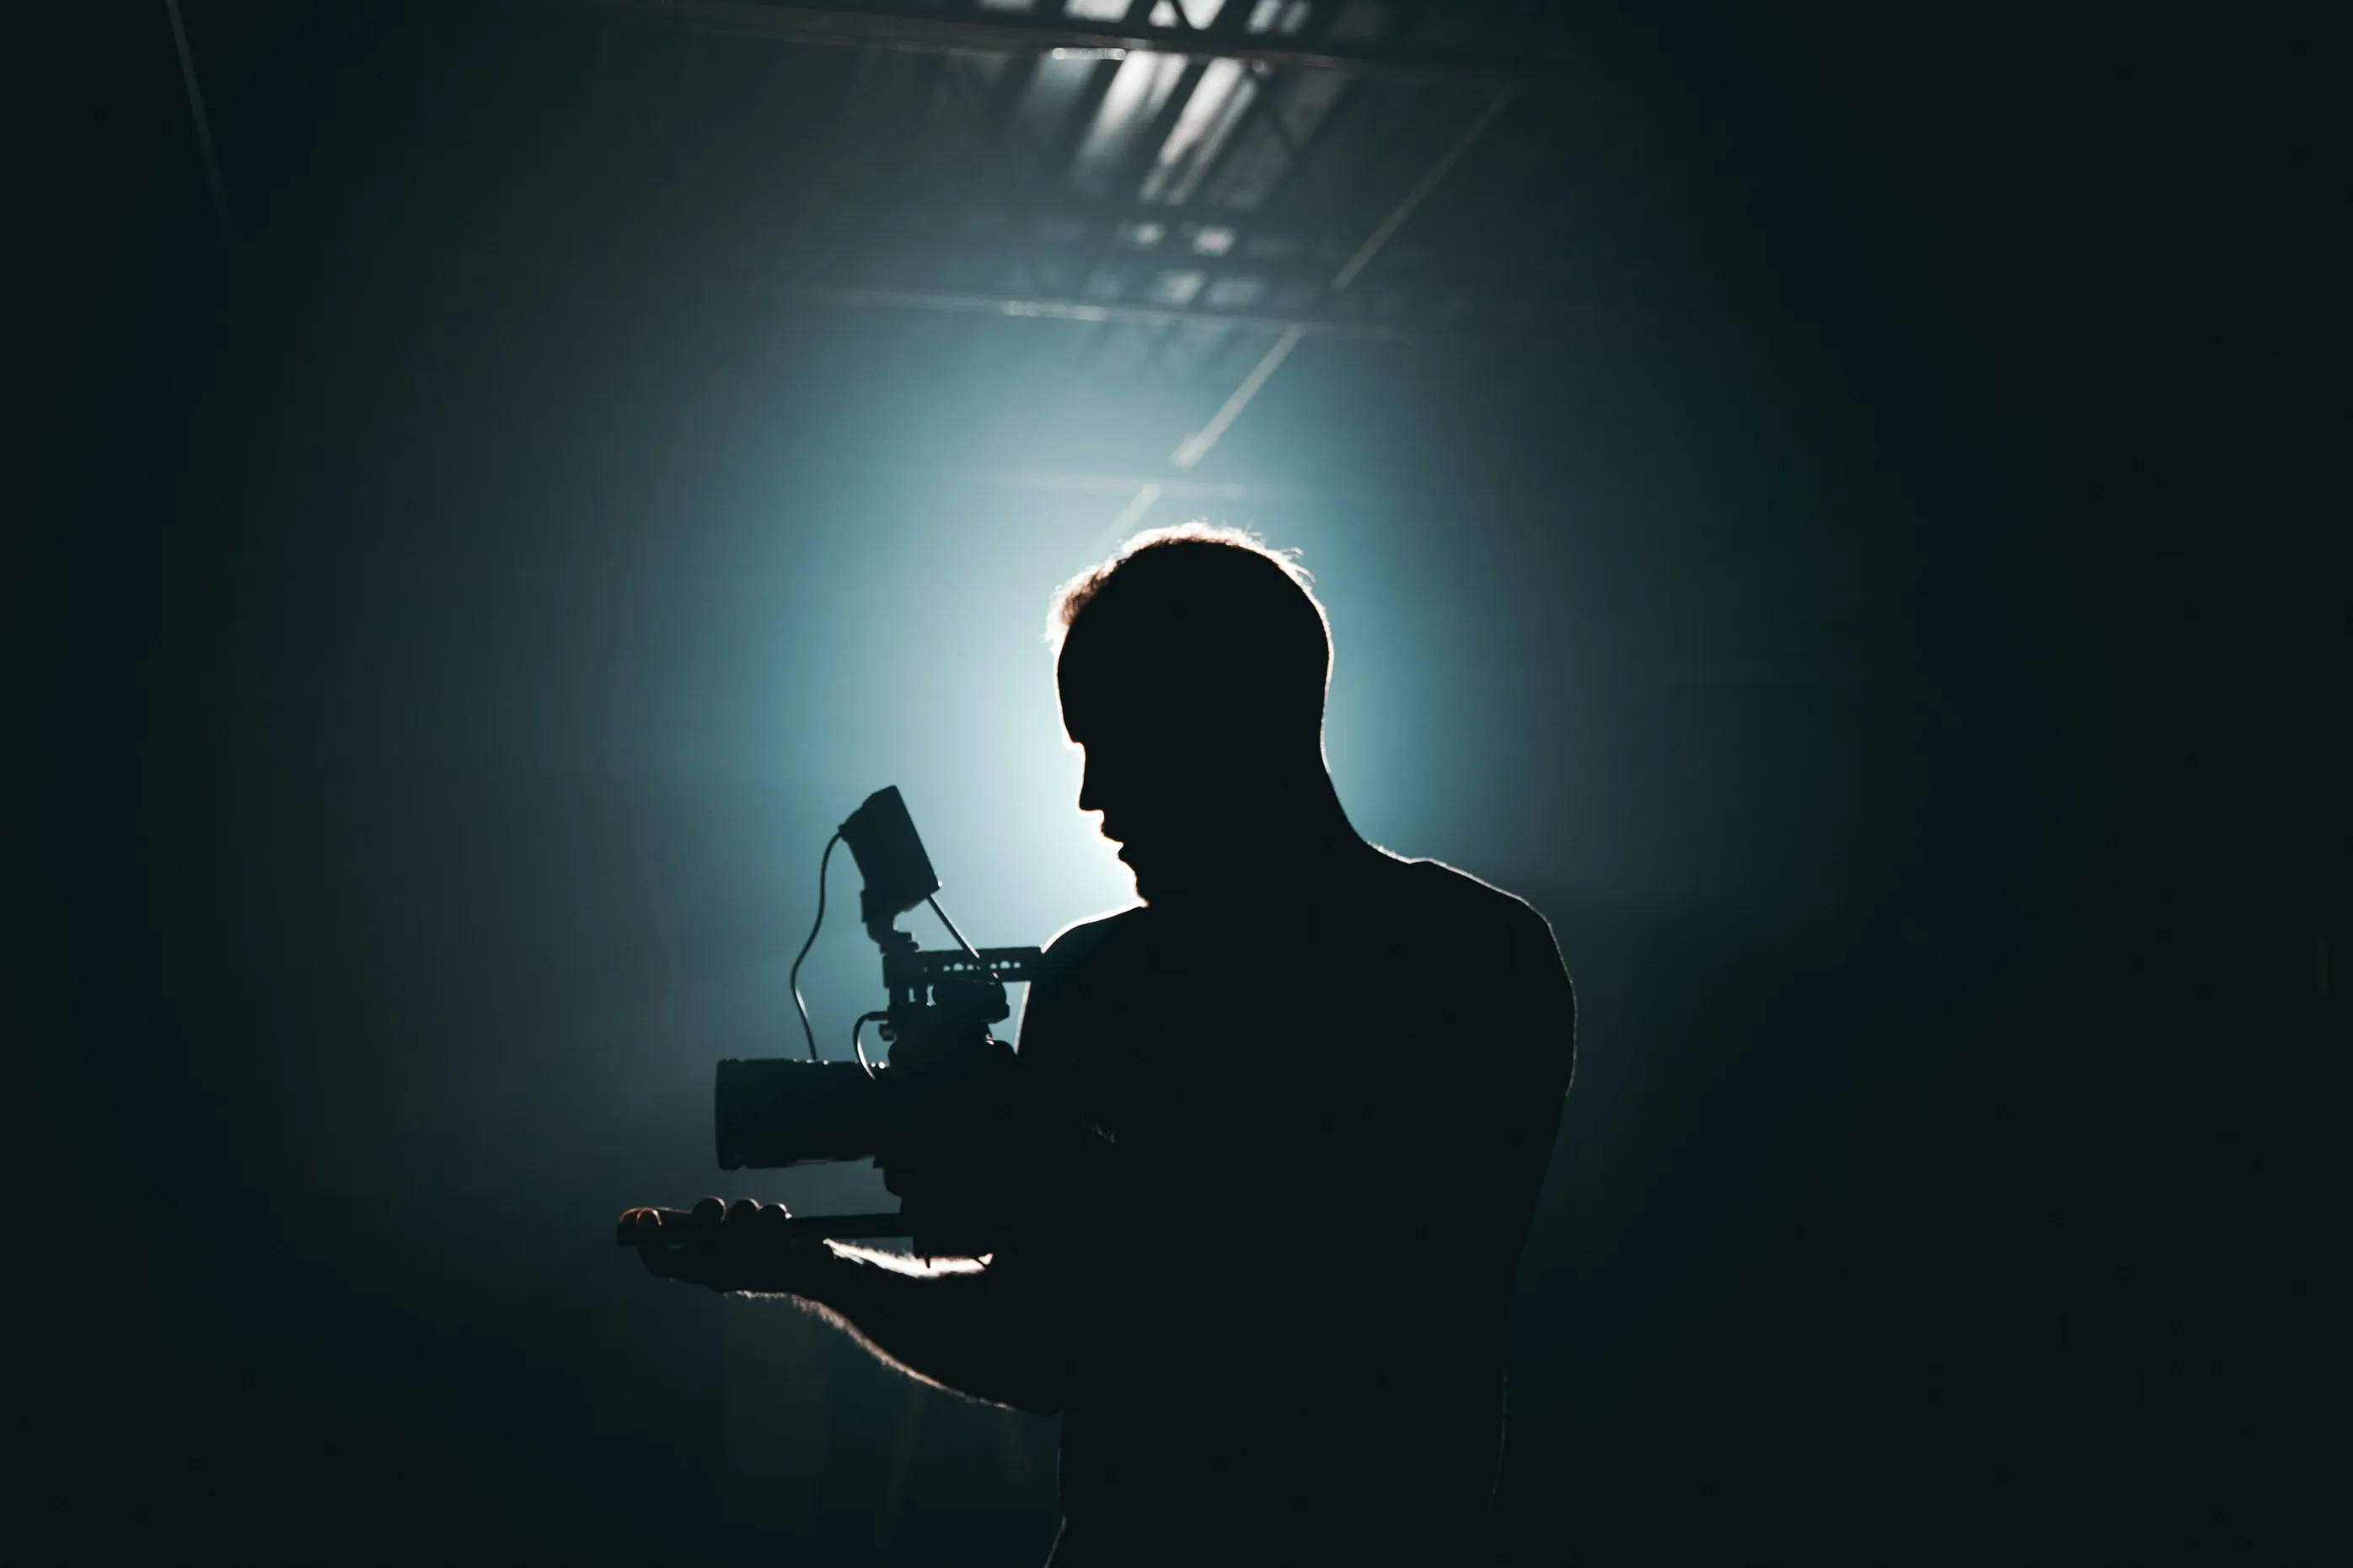 a man holding a camera rig in a low-lit, cyan lighting environment